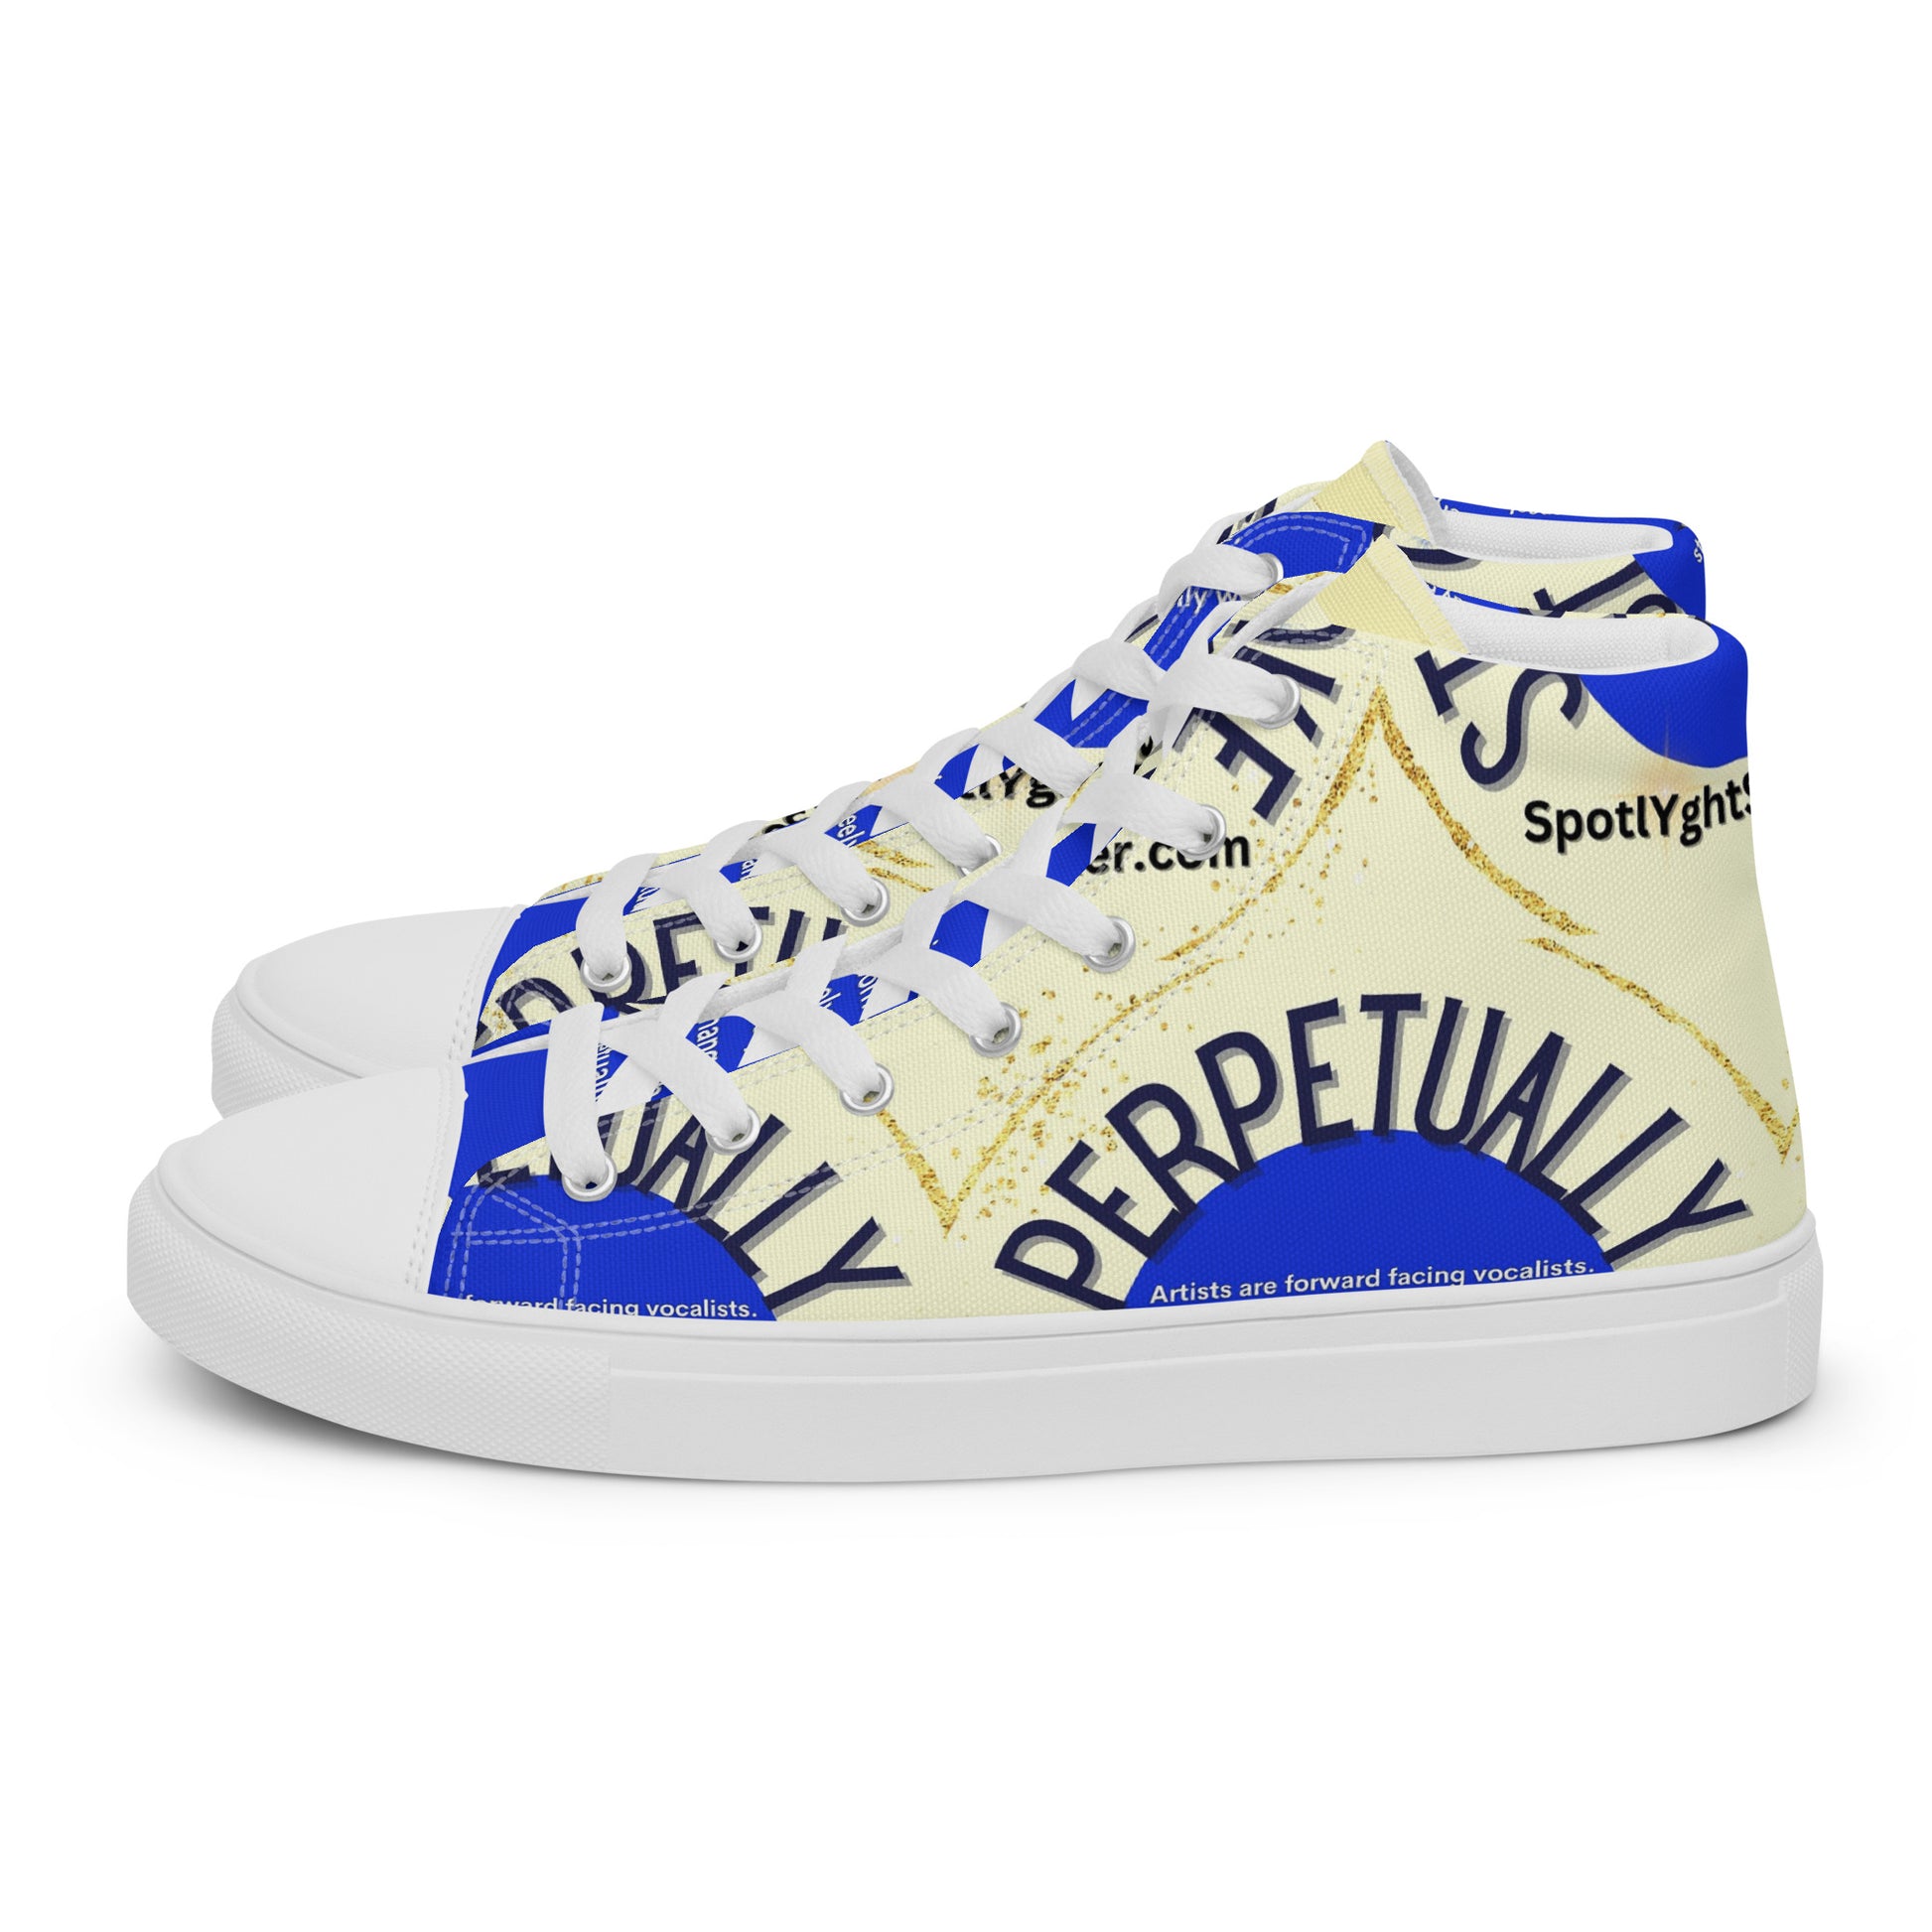 Perpetually Woke Artist High Top Canvas Shoes statement piece for male artists who seek the spotlight